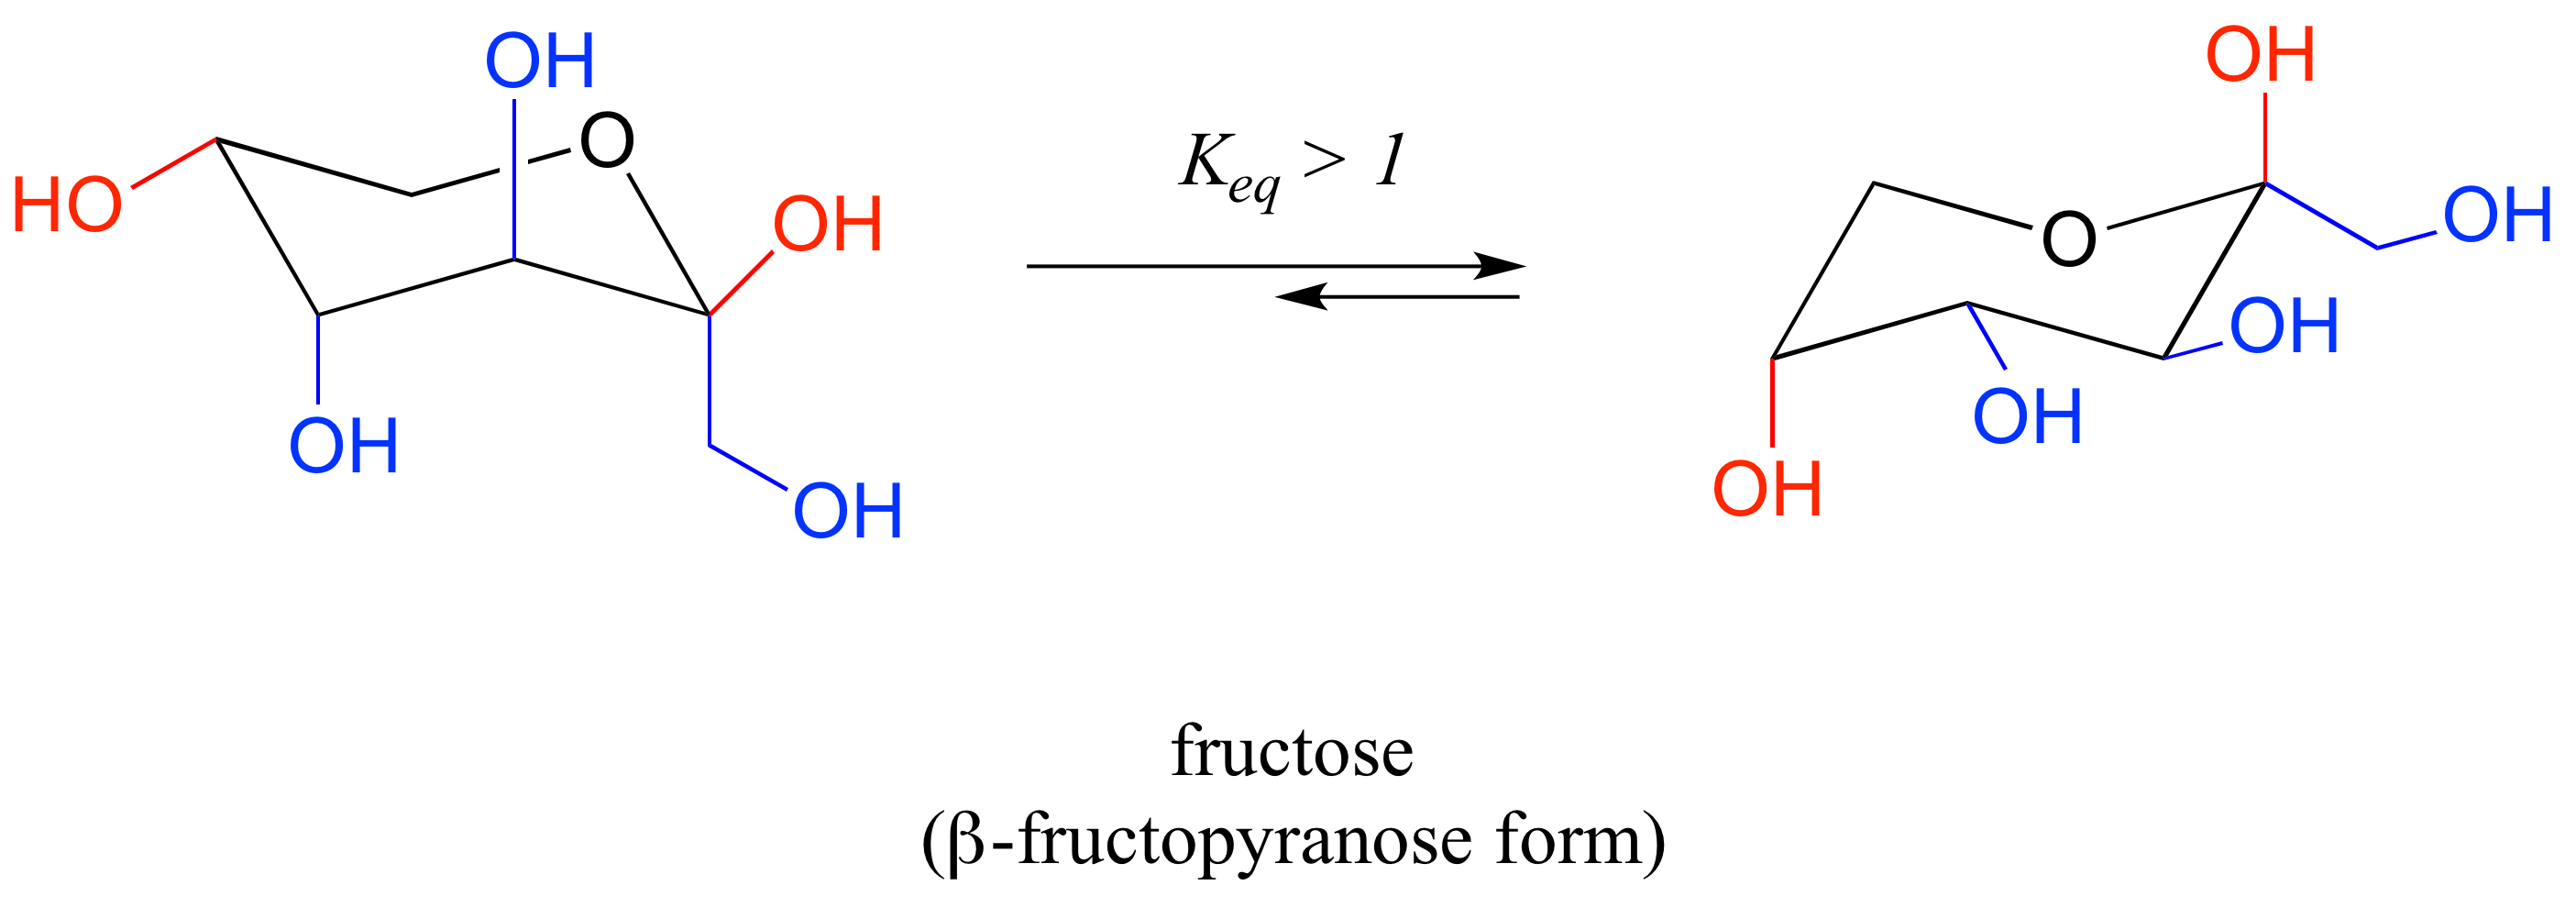 Fructose molecule in the form of a six-membered ring. On left, three substituents axial and two substituents equatorial. On right, two substituents axial and three substituents equatorial. Equilibrium constant greater than one.